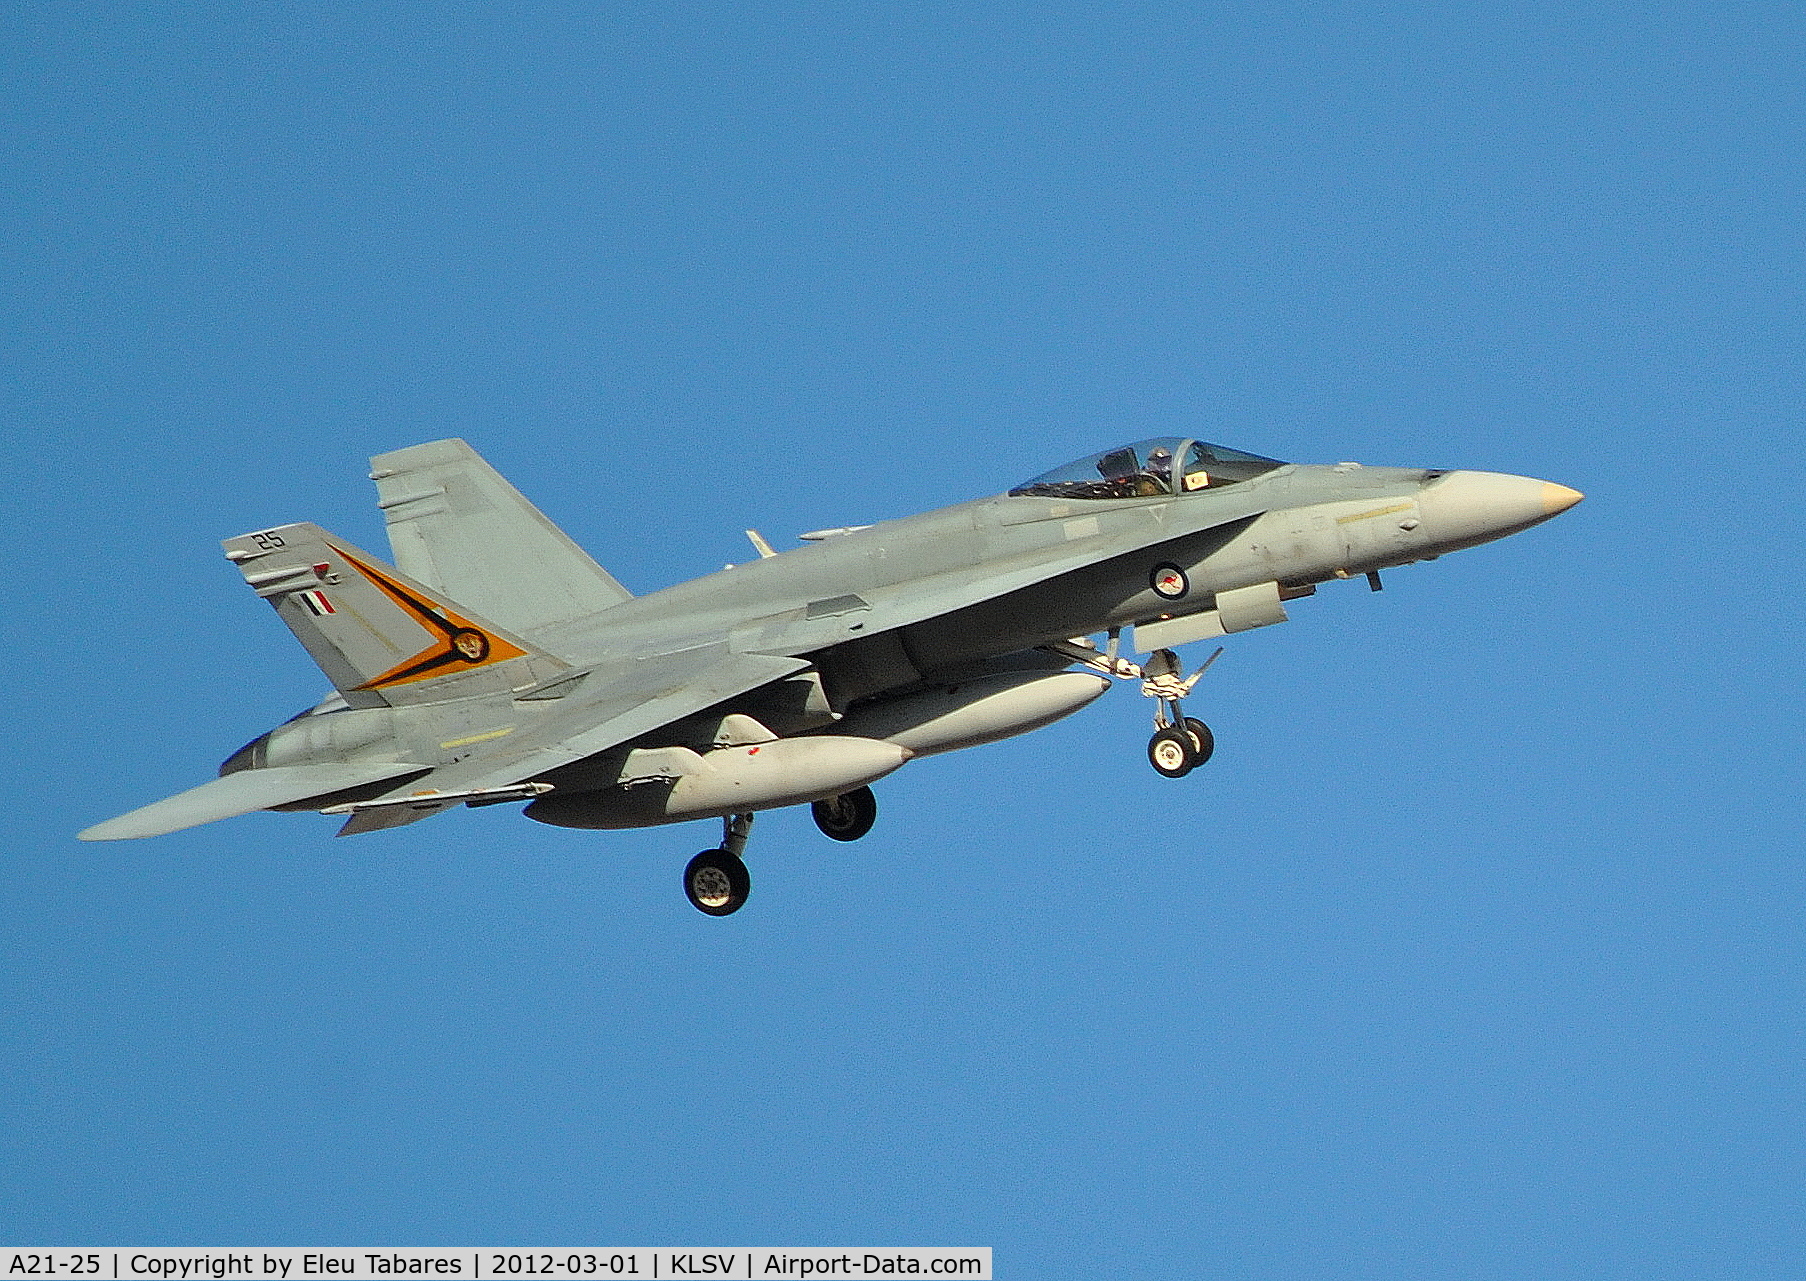 A21-25, 1988 McDonnell Douglas F/A-18A Hornet C/N 0496/AF025, Taken during Red Flag Exercise at Nellis Air Force Base, Nevada.